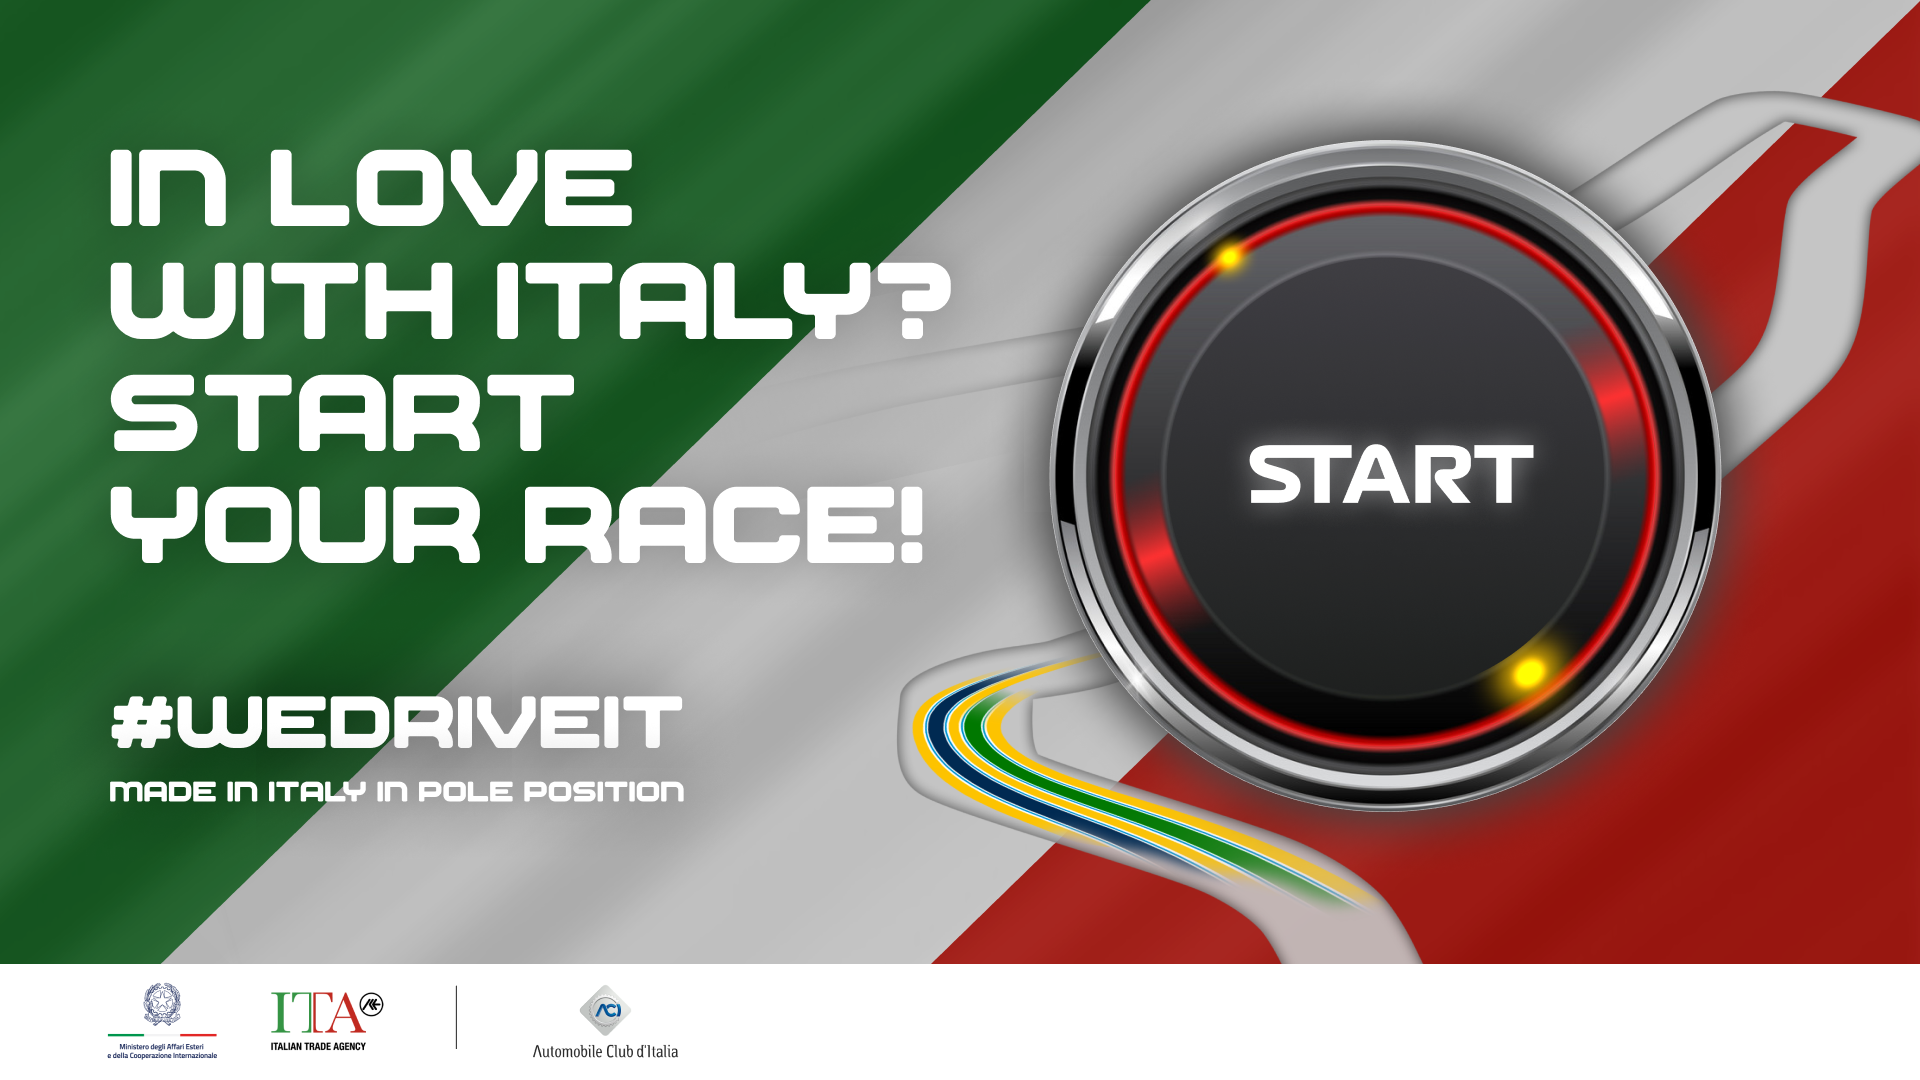 #WEDRIVEIT – MADE IN ITALY IN POLE POSITION